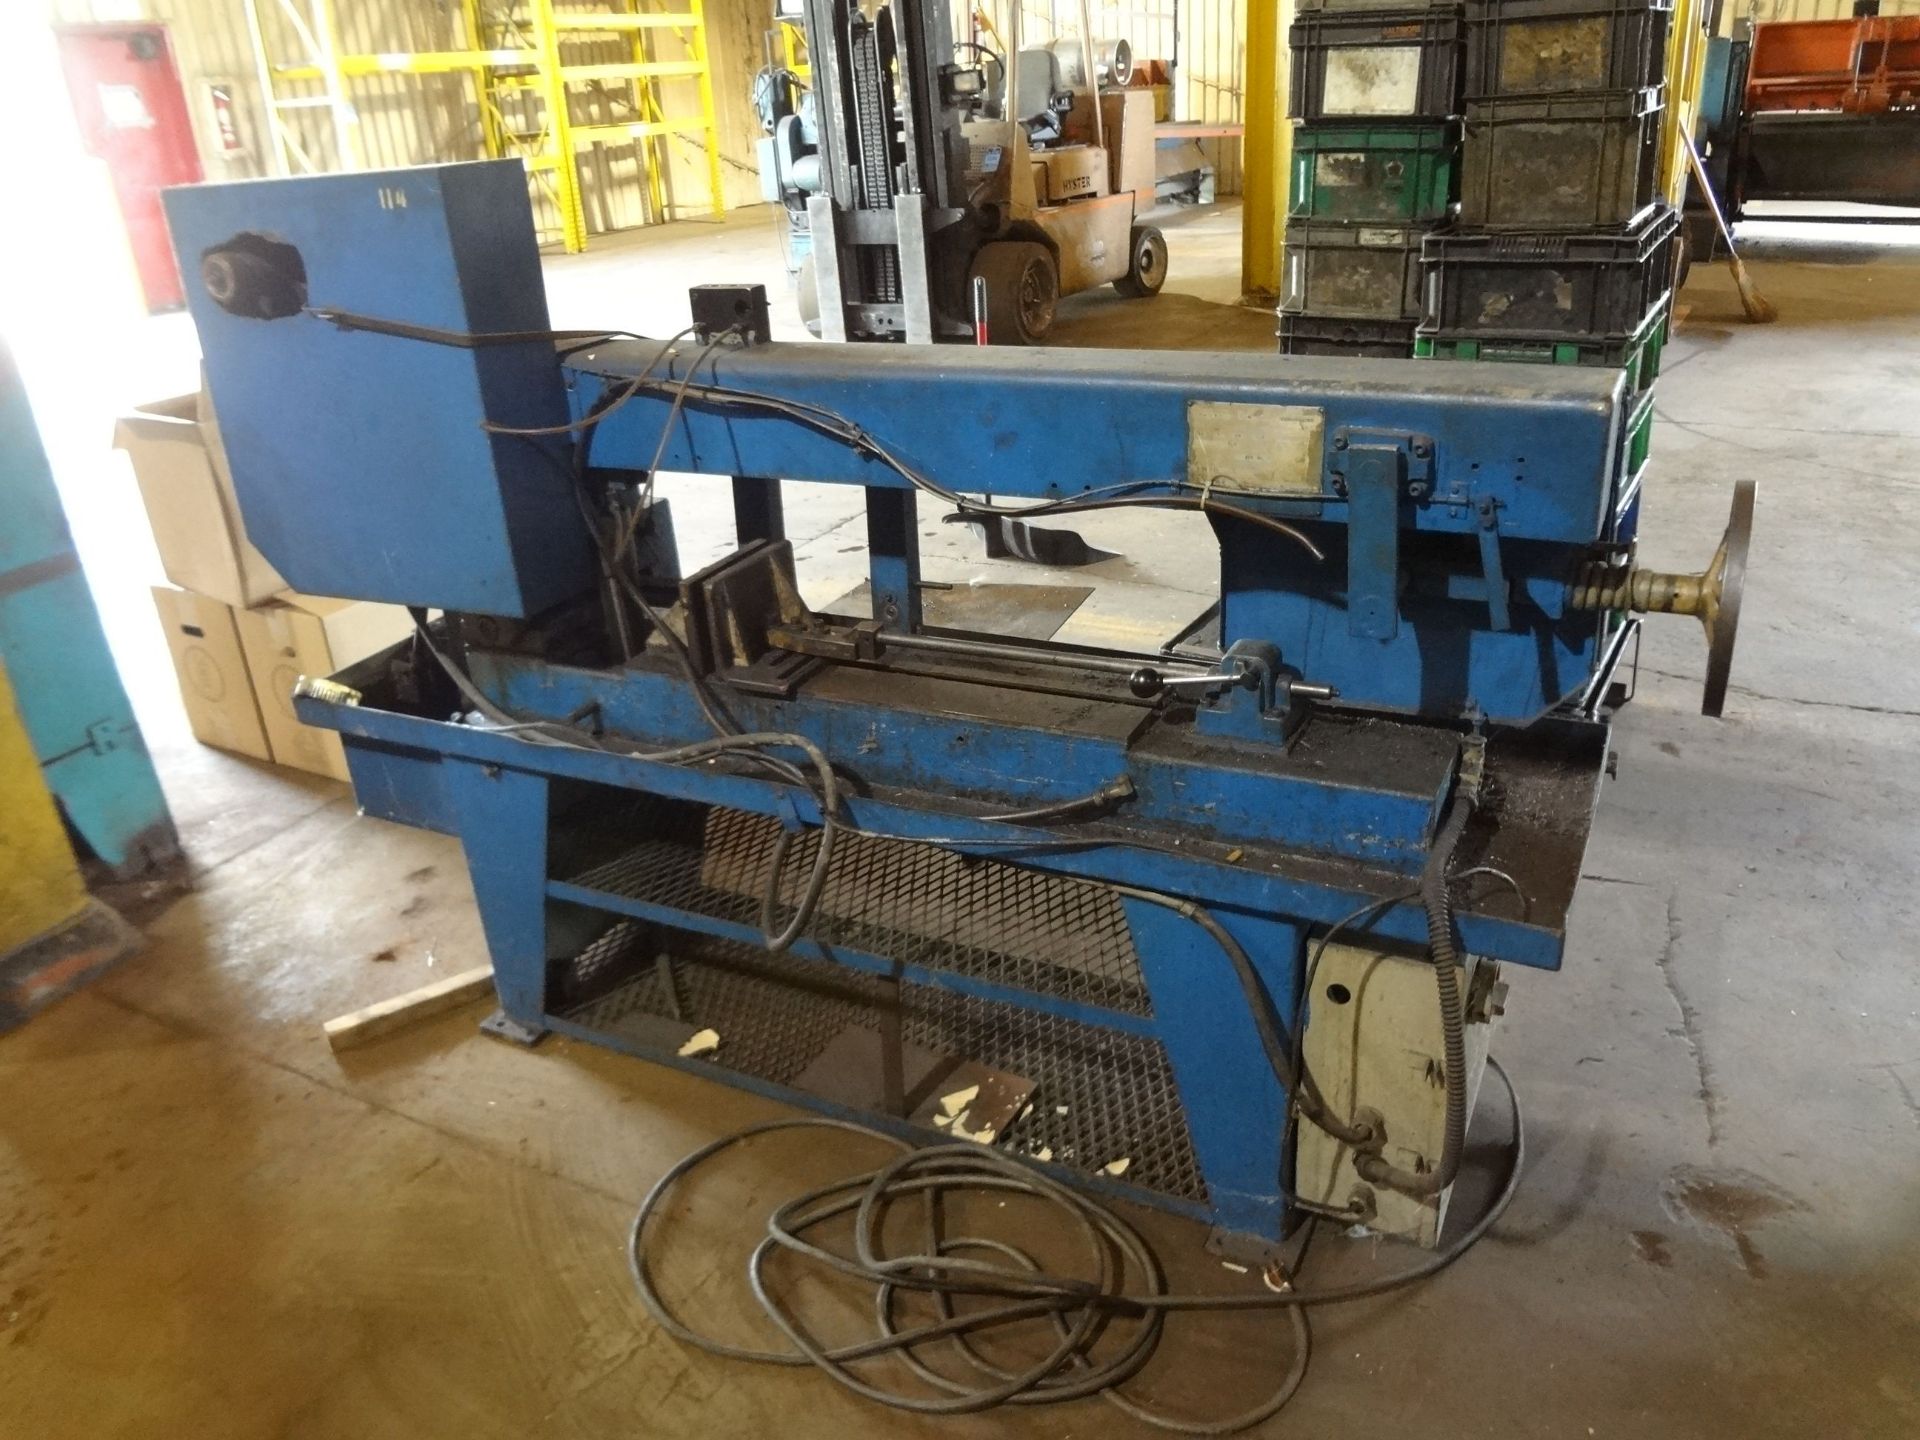 9" X 16" DOALL MODEL C-916 AUTOMATIC HORIZONTAL BAND SAW; S/N 438-85812, HYDRAULIC CLAMPING - Image 5 of 6